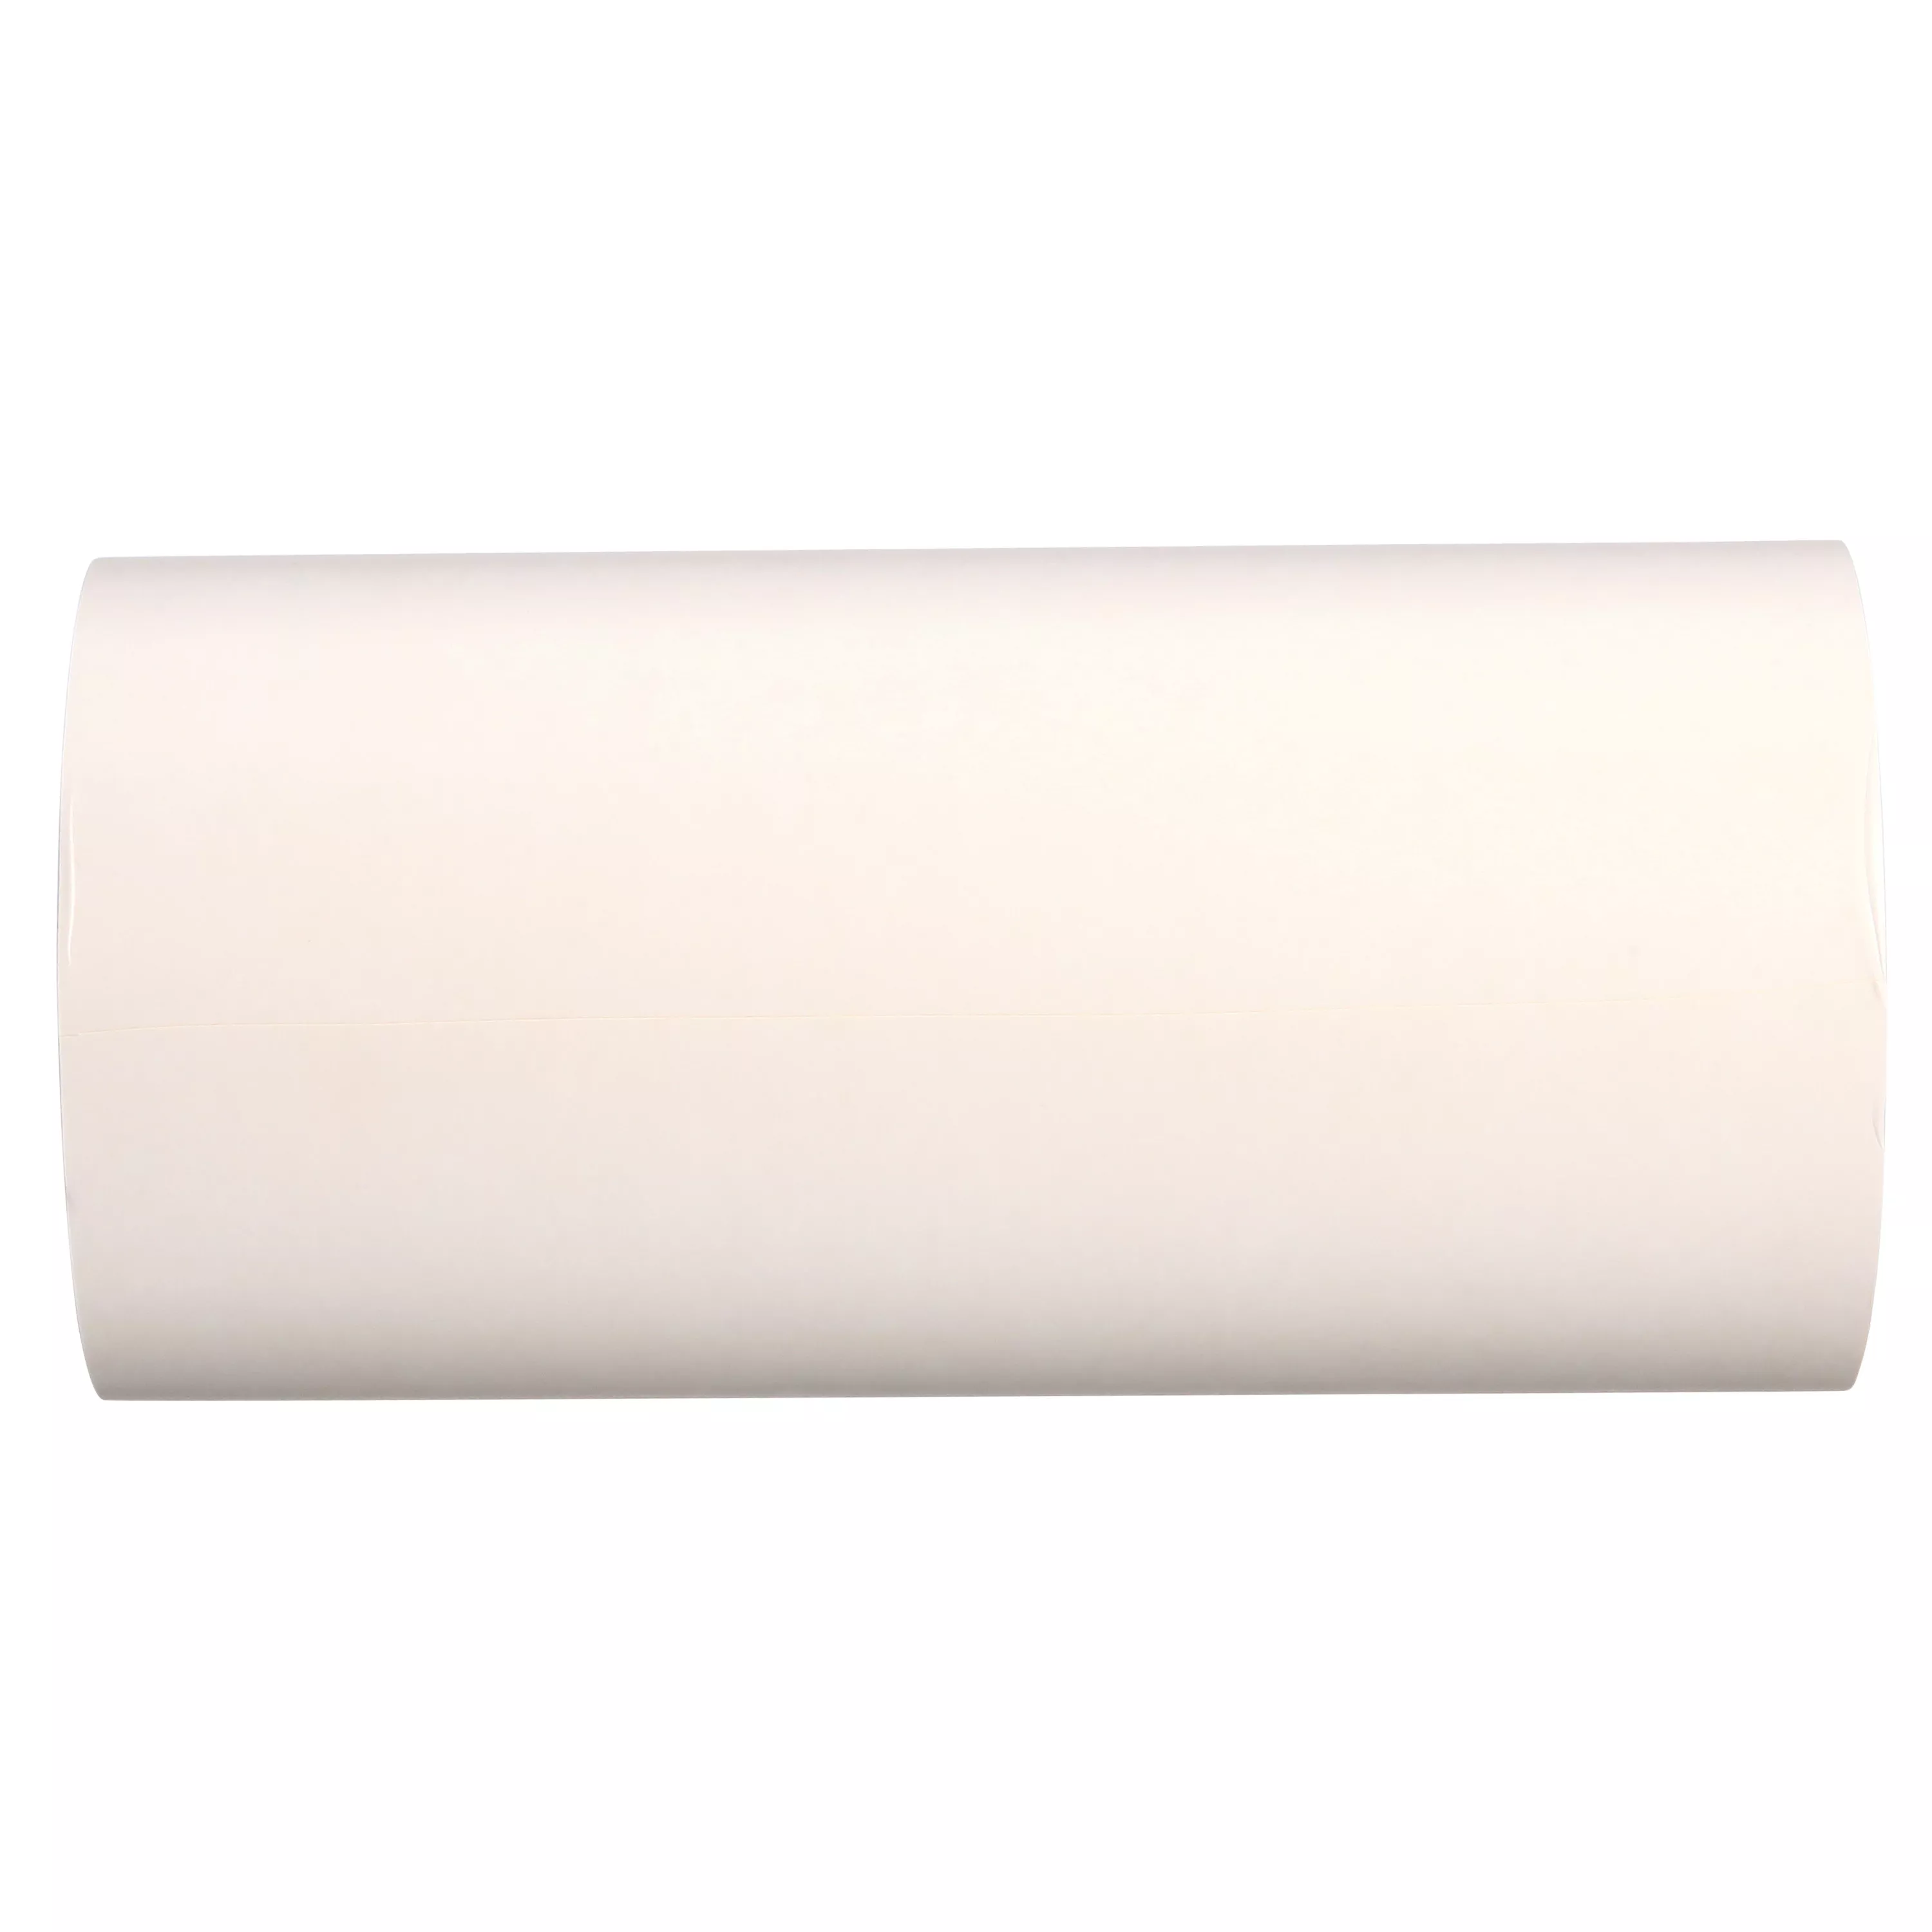 Product Number 442KW | 3M™ Double Coated Polyester Tape 442KW